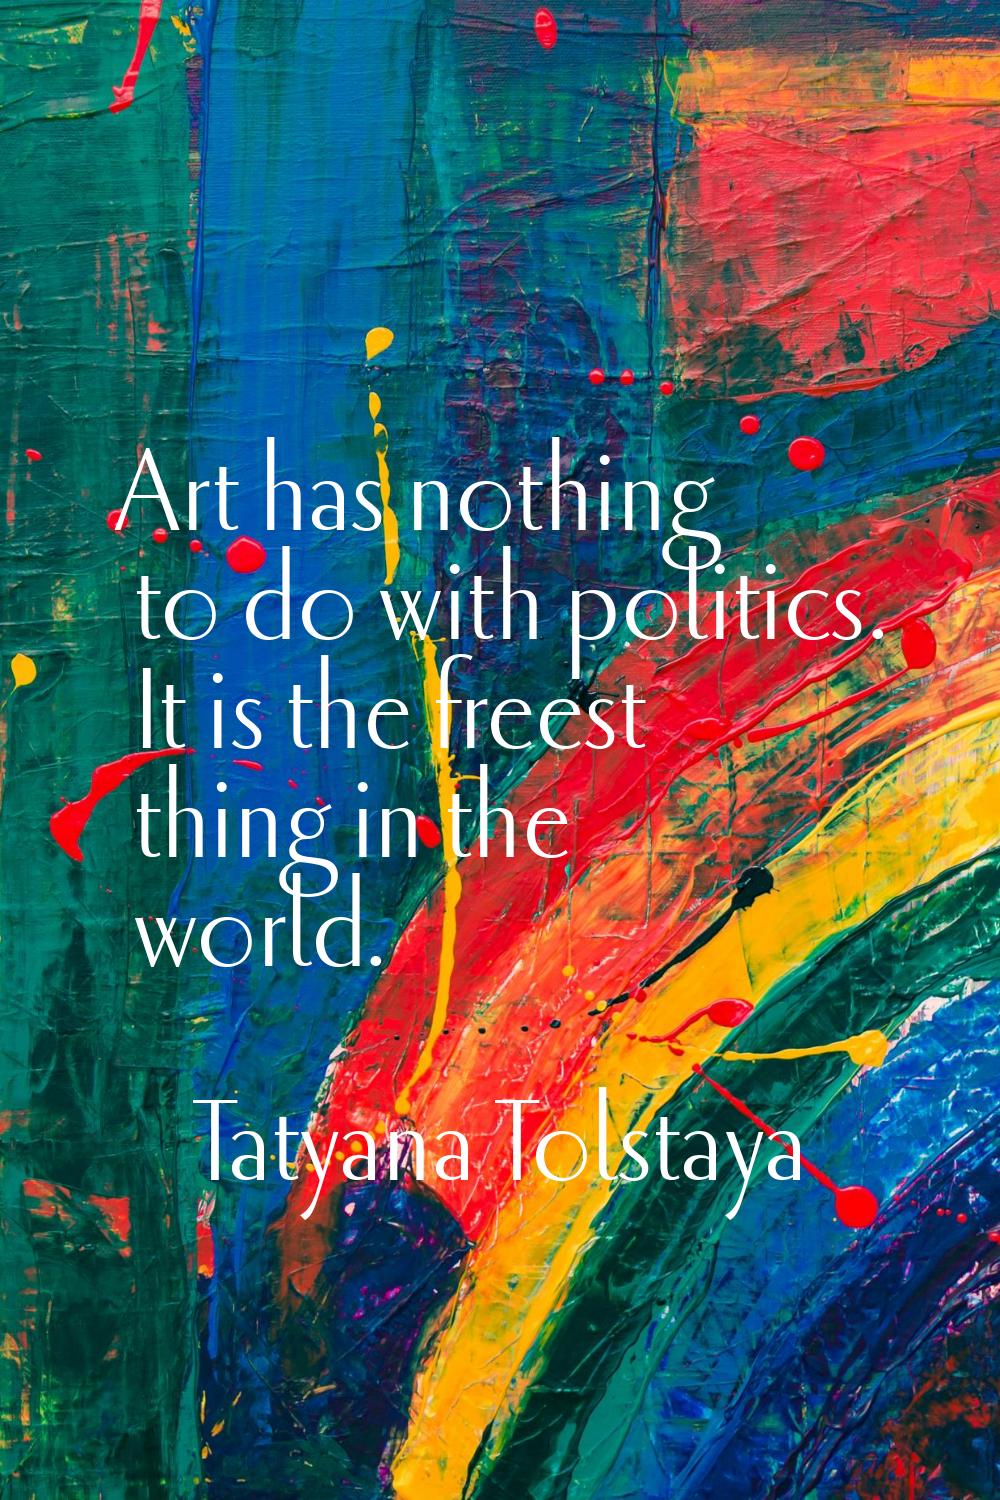 Art has nothing to do with politics. It is the freest thing in the world.